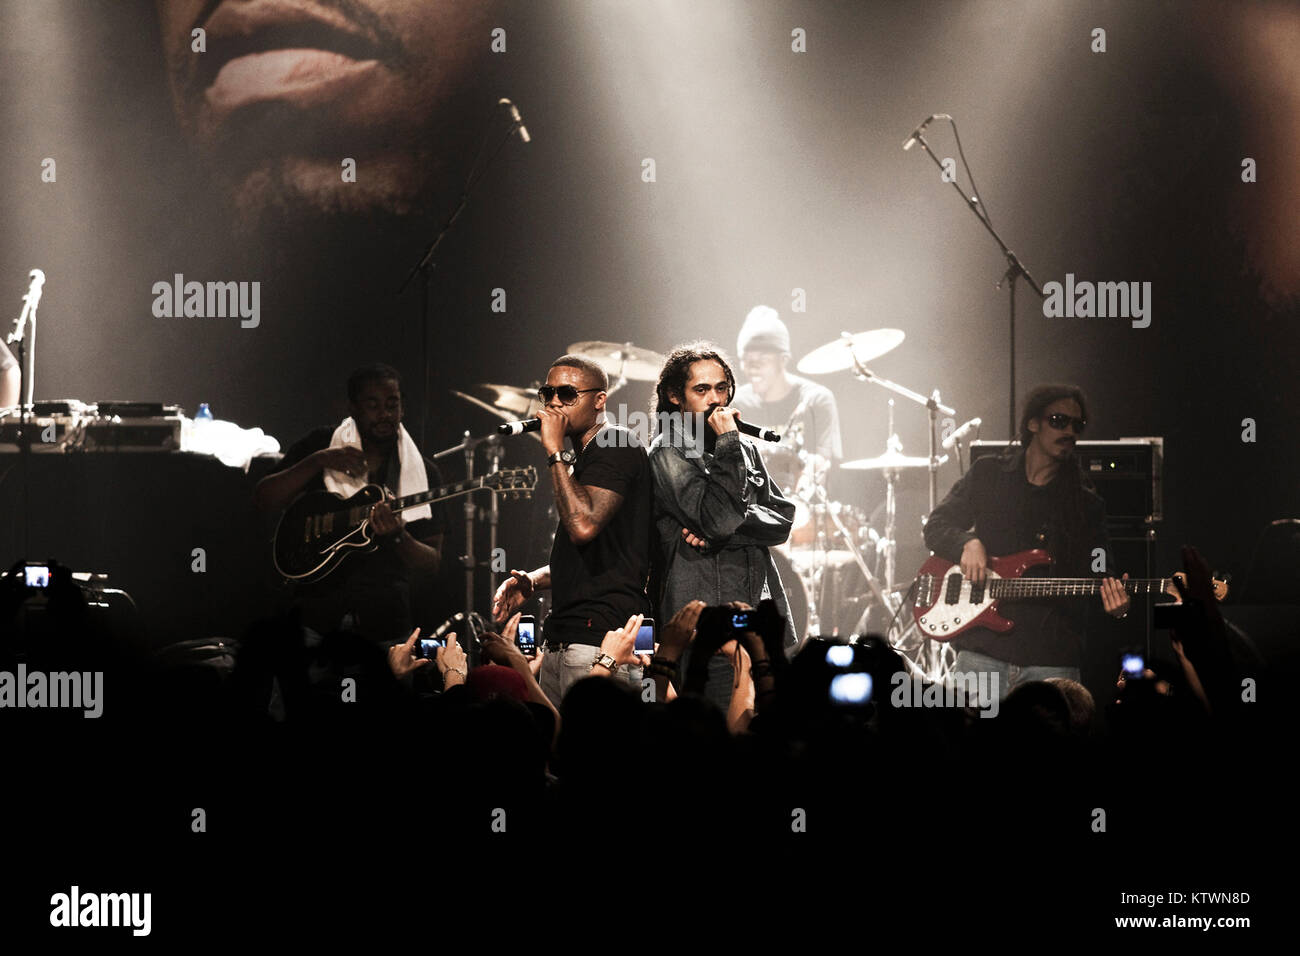 The American rapper Nas (L) and the Jamaican reggae artist Damian Marley (R) released the common album ‘Distant Relatives’ and are here pictured at a live concert at Vega in Copenhagen. Denmark 06/07 2010. Stock Photo